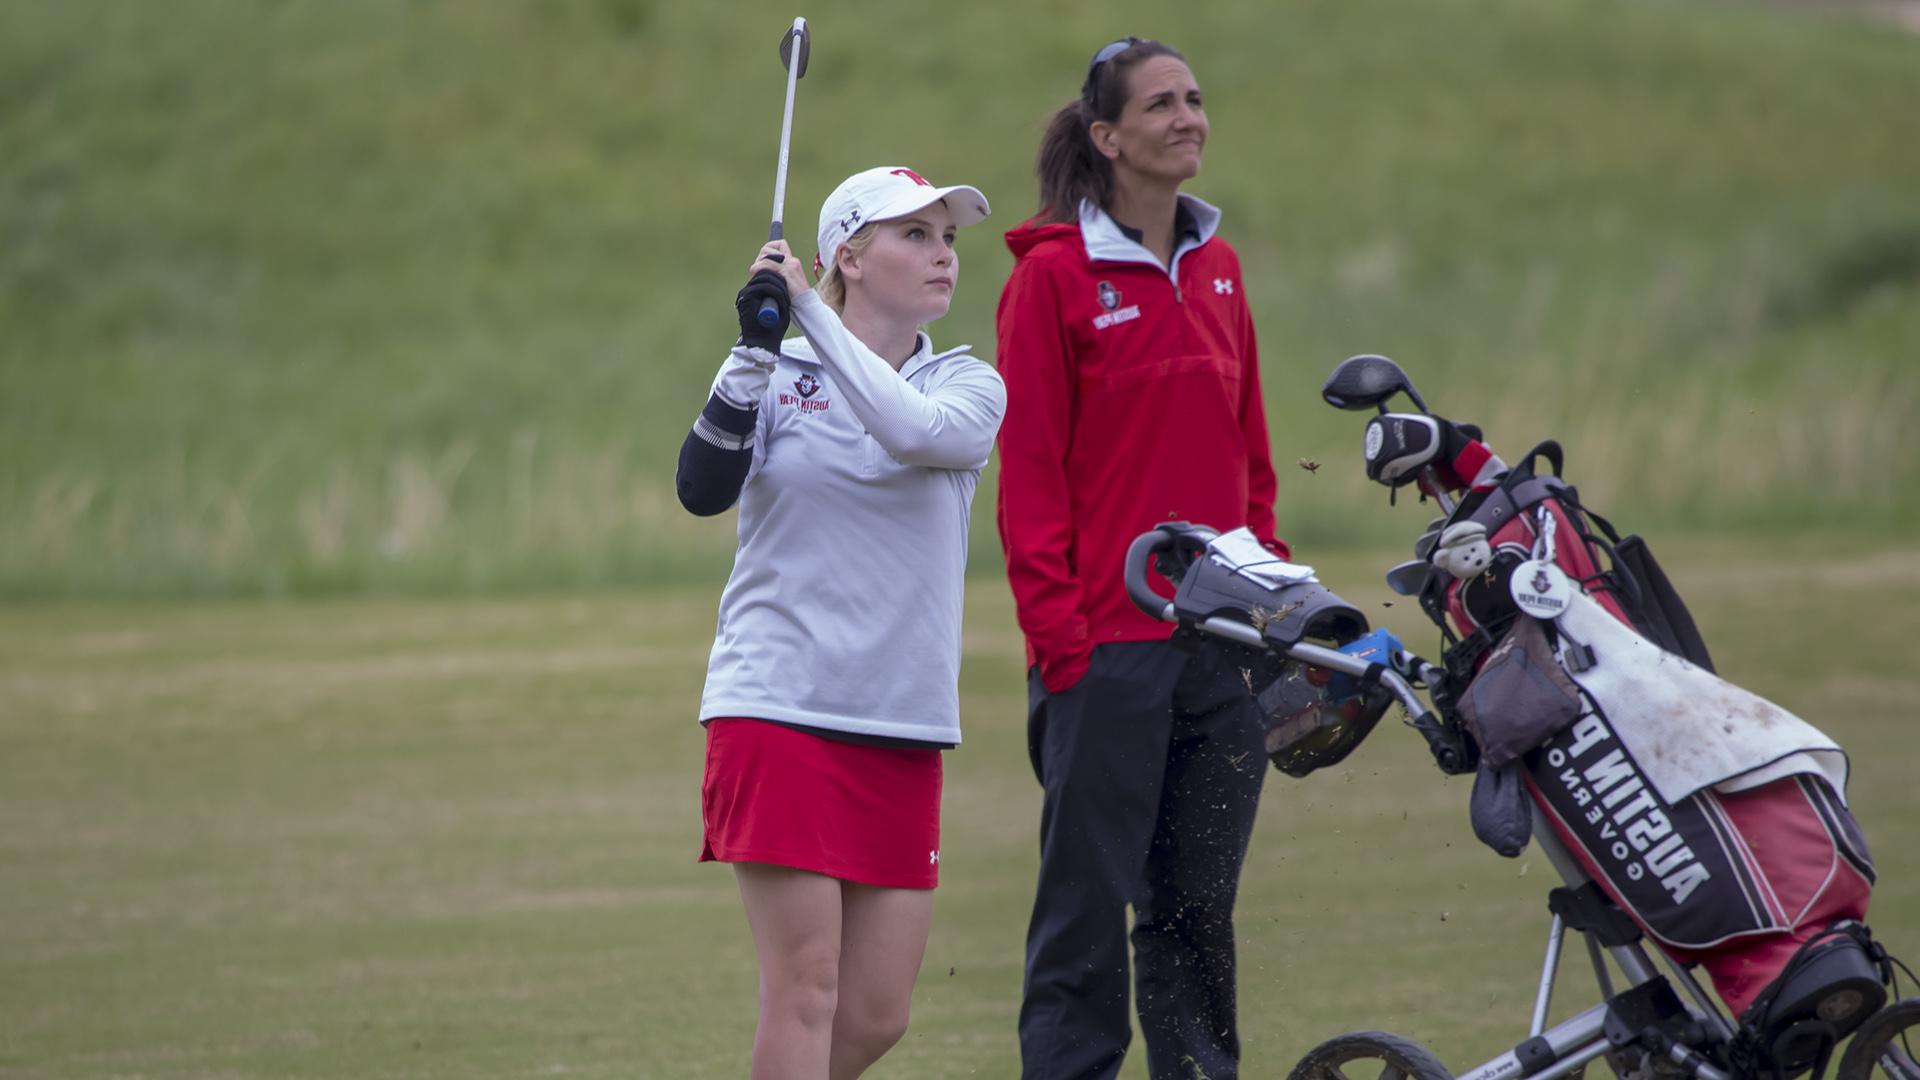 Stamps hits ball during Golf Tournament